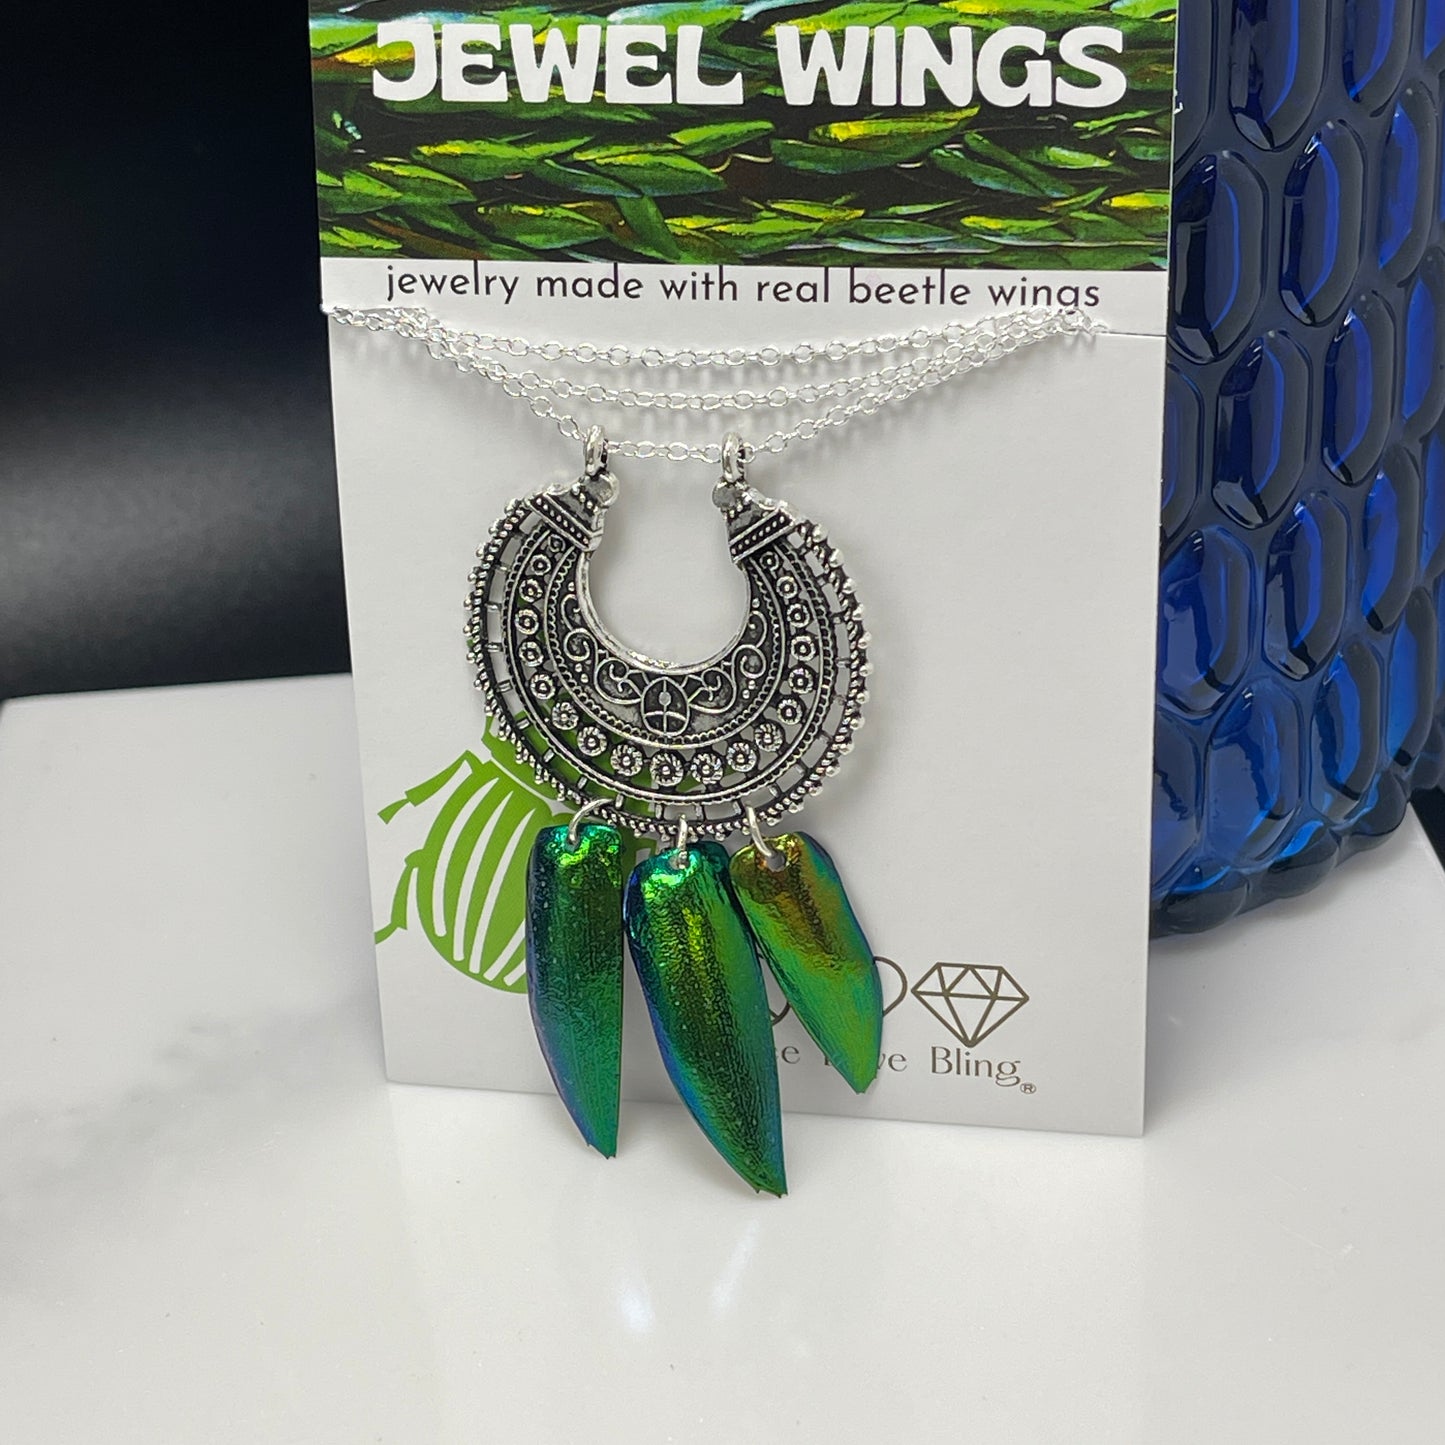 Jewel Wing retail pack